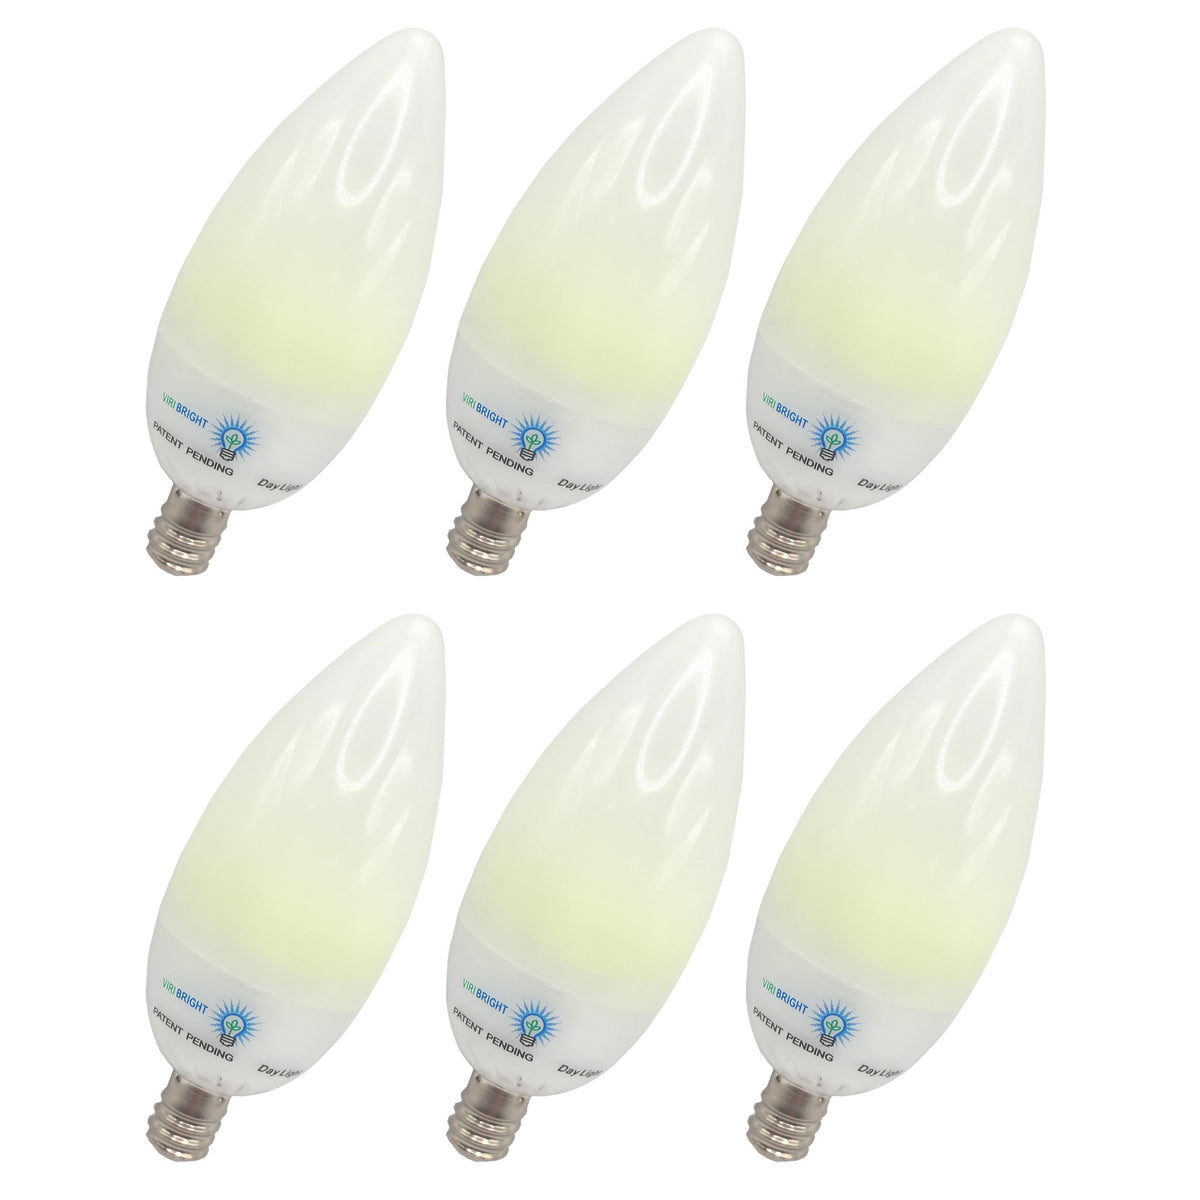 Picture of Viribright 74557-6 3.2W 6000K 22W Equivalent E12 LED Chandelier Daylight Bulb - Pack of 6